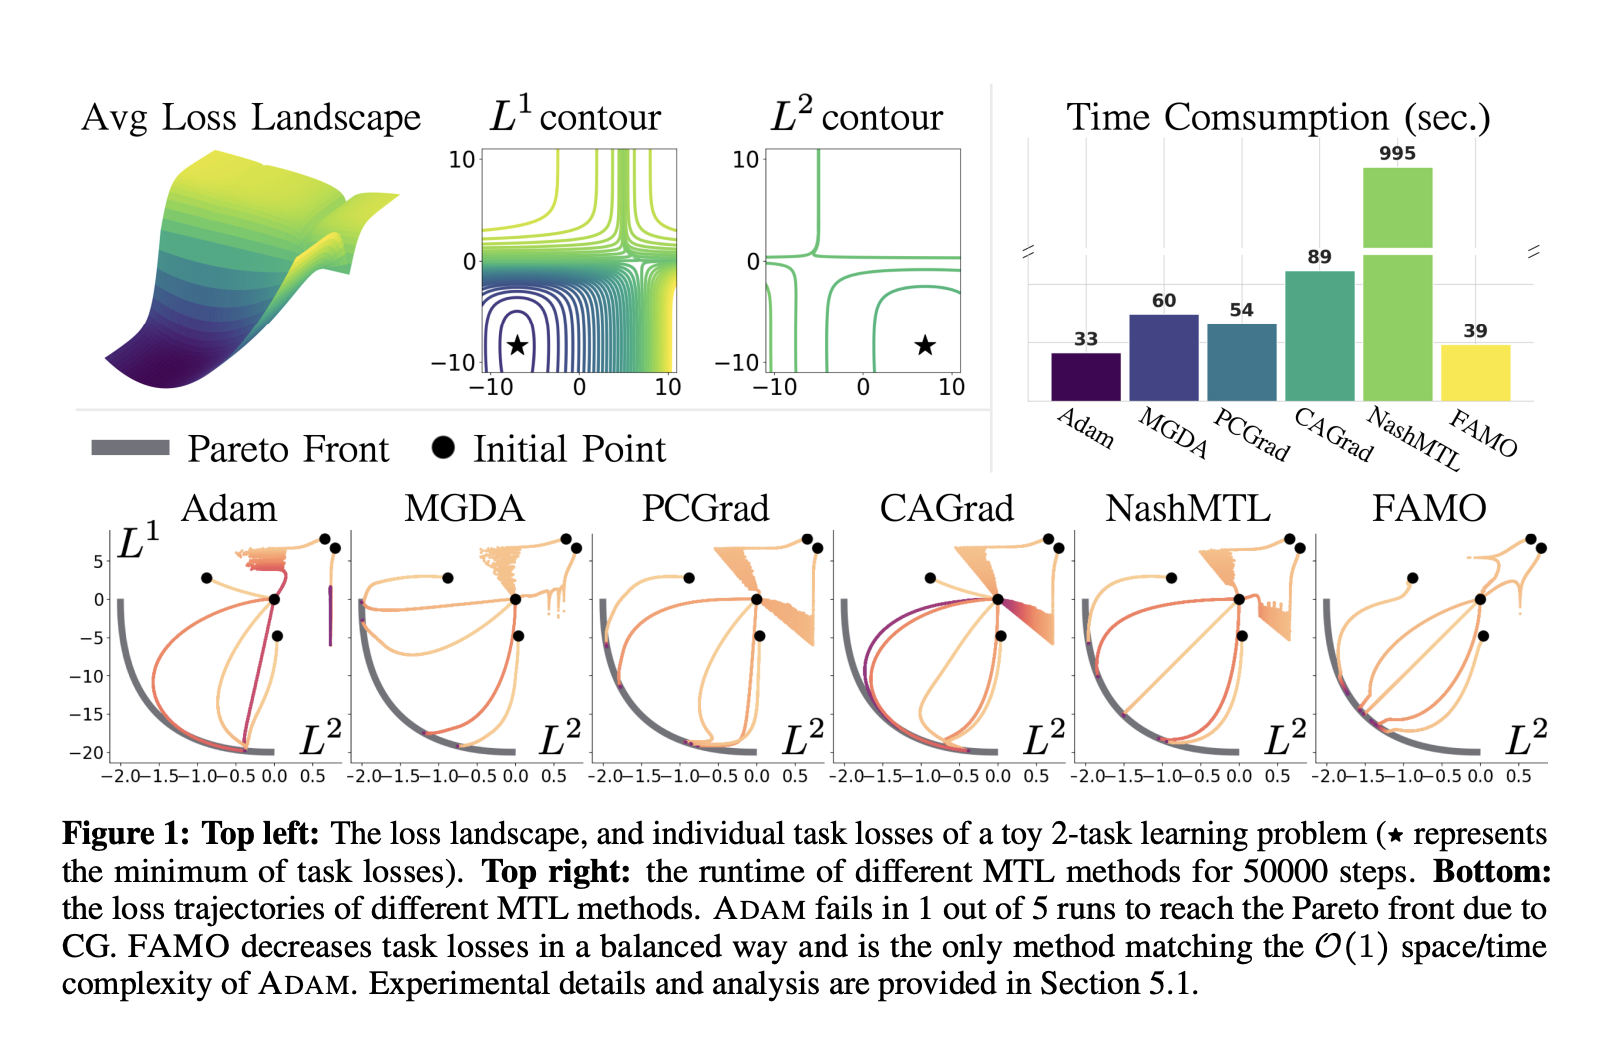  FAMO: A Fast Optimization Method for Multitask Learning (MTL) that Mitigates the Conflicting Gradients using O(1) Space and Time